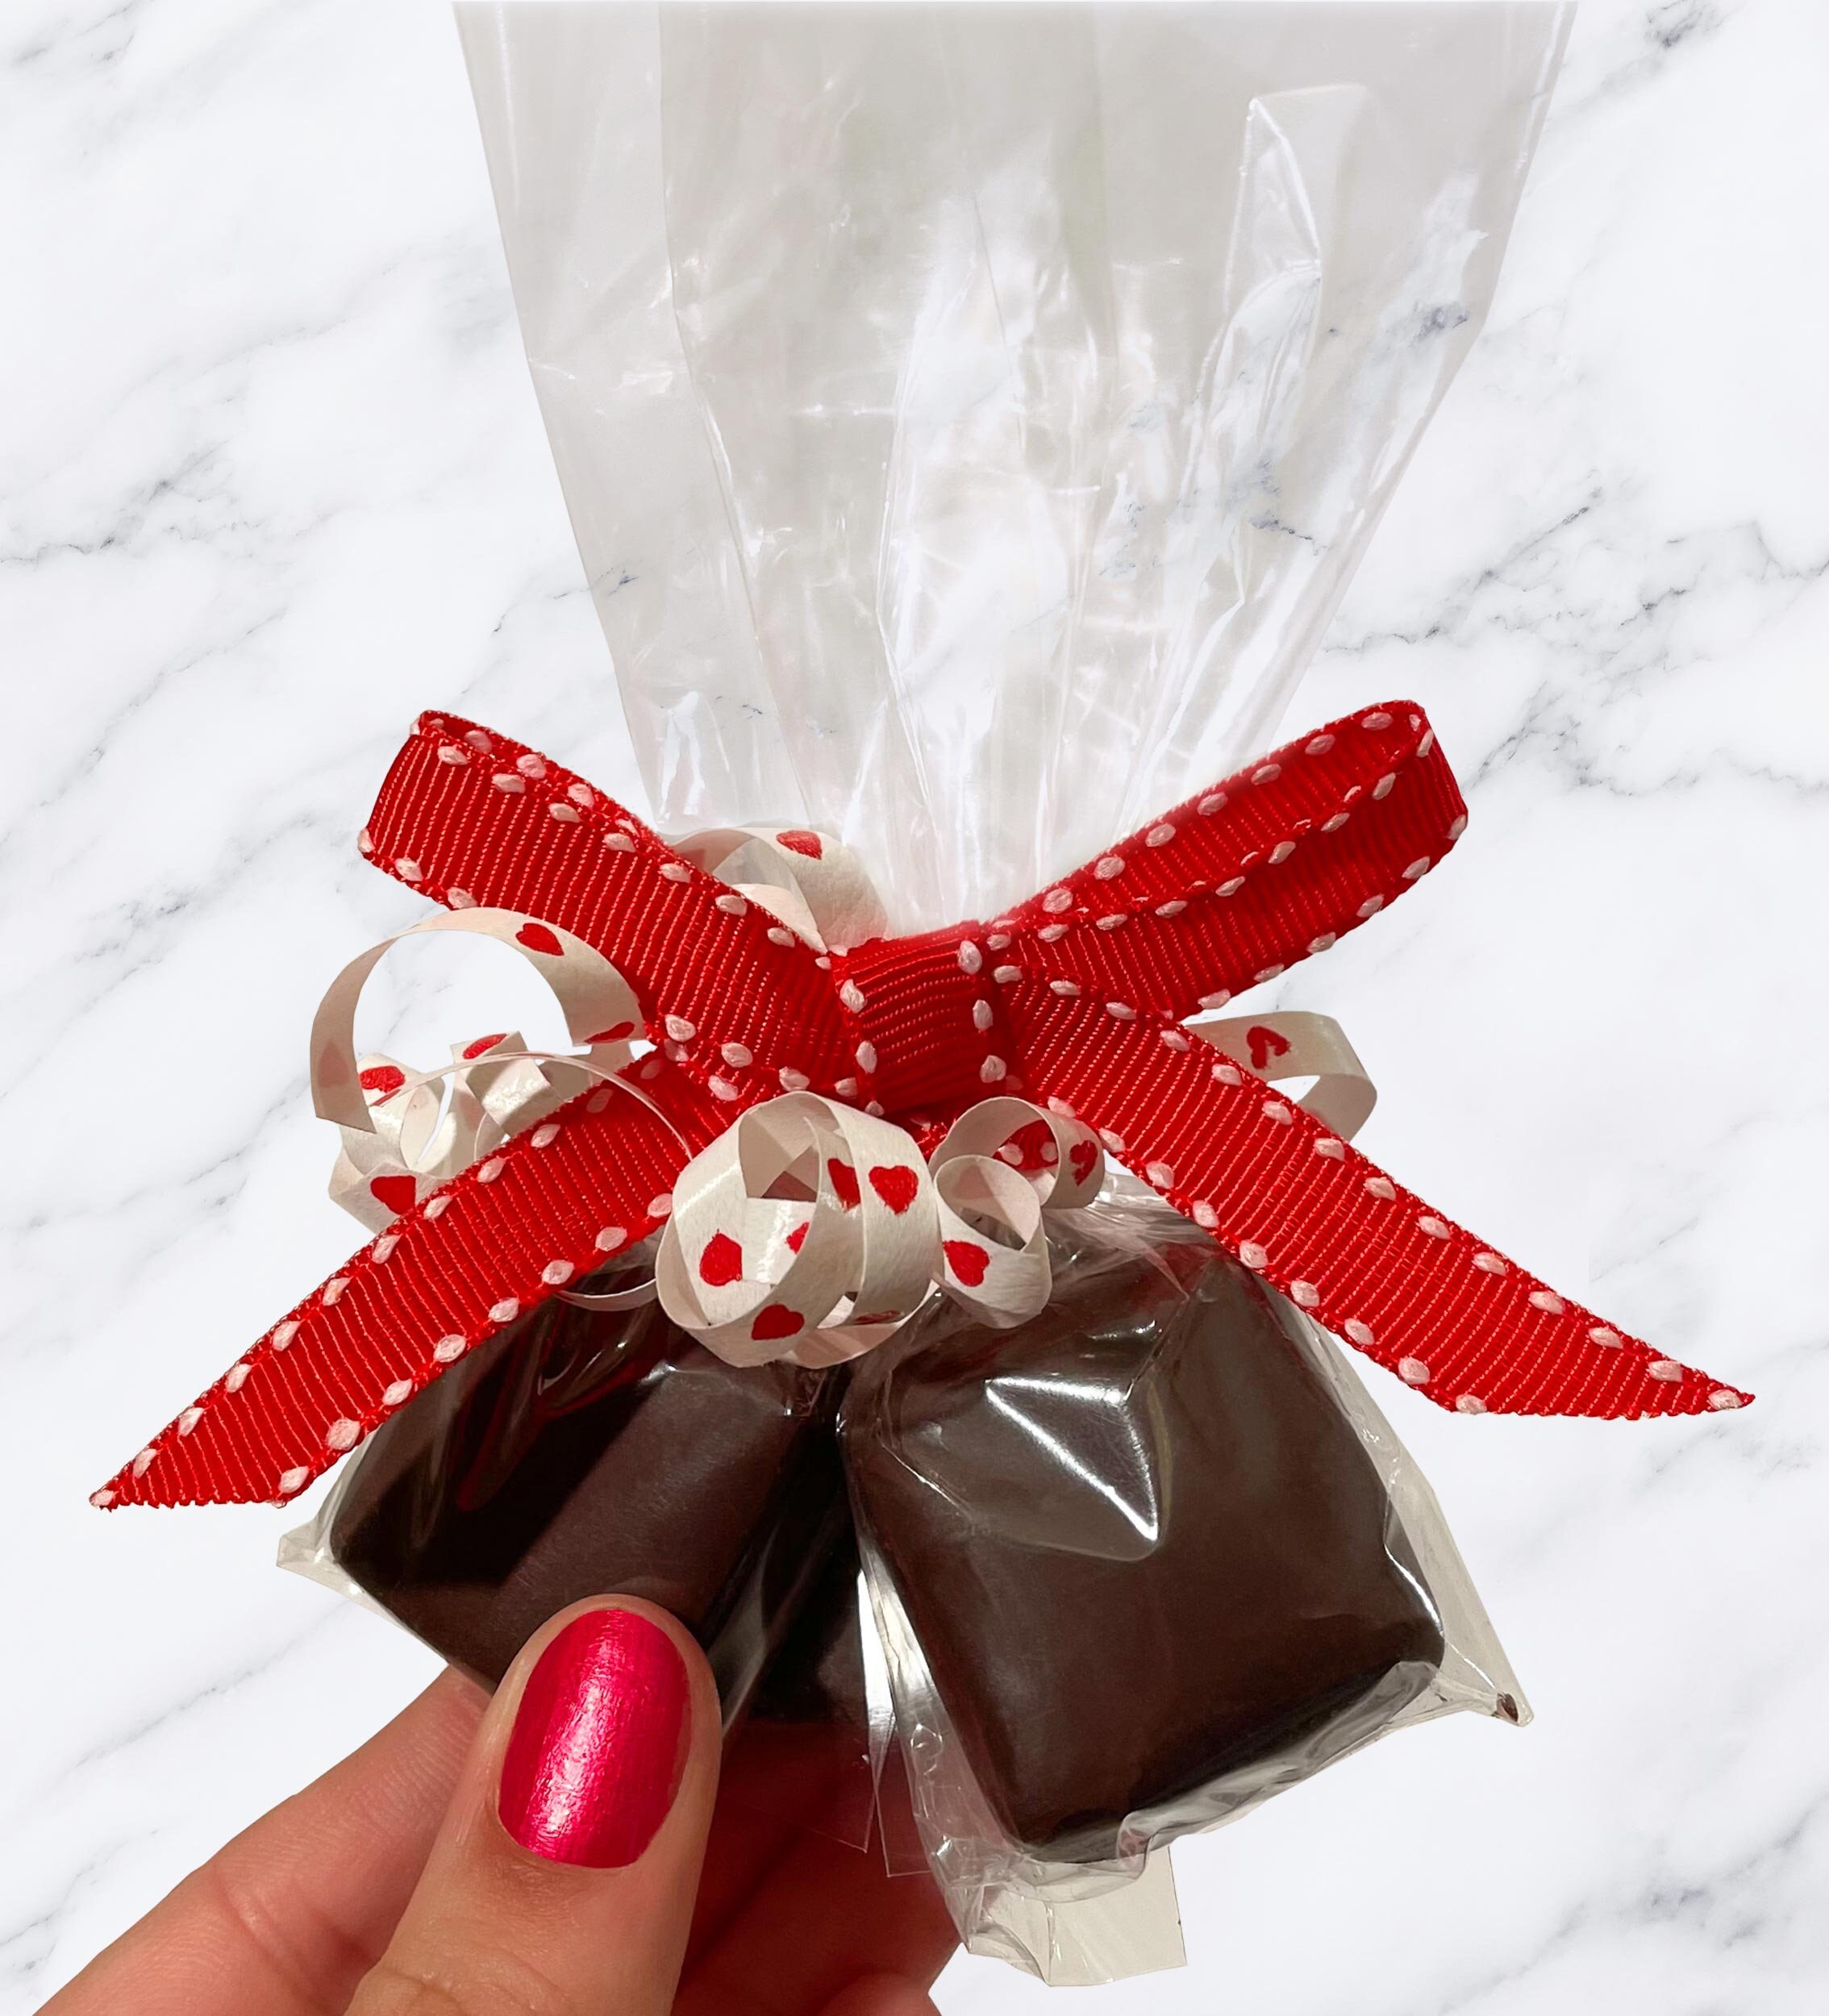 Dingleberries!  Chocolate company, Gourmet food gifts, Chocolate delight